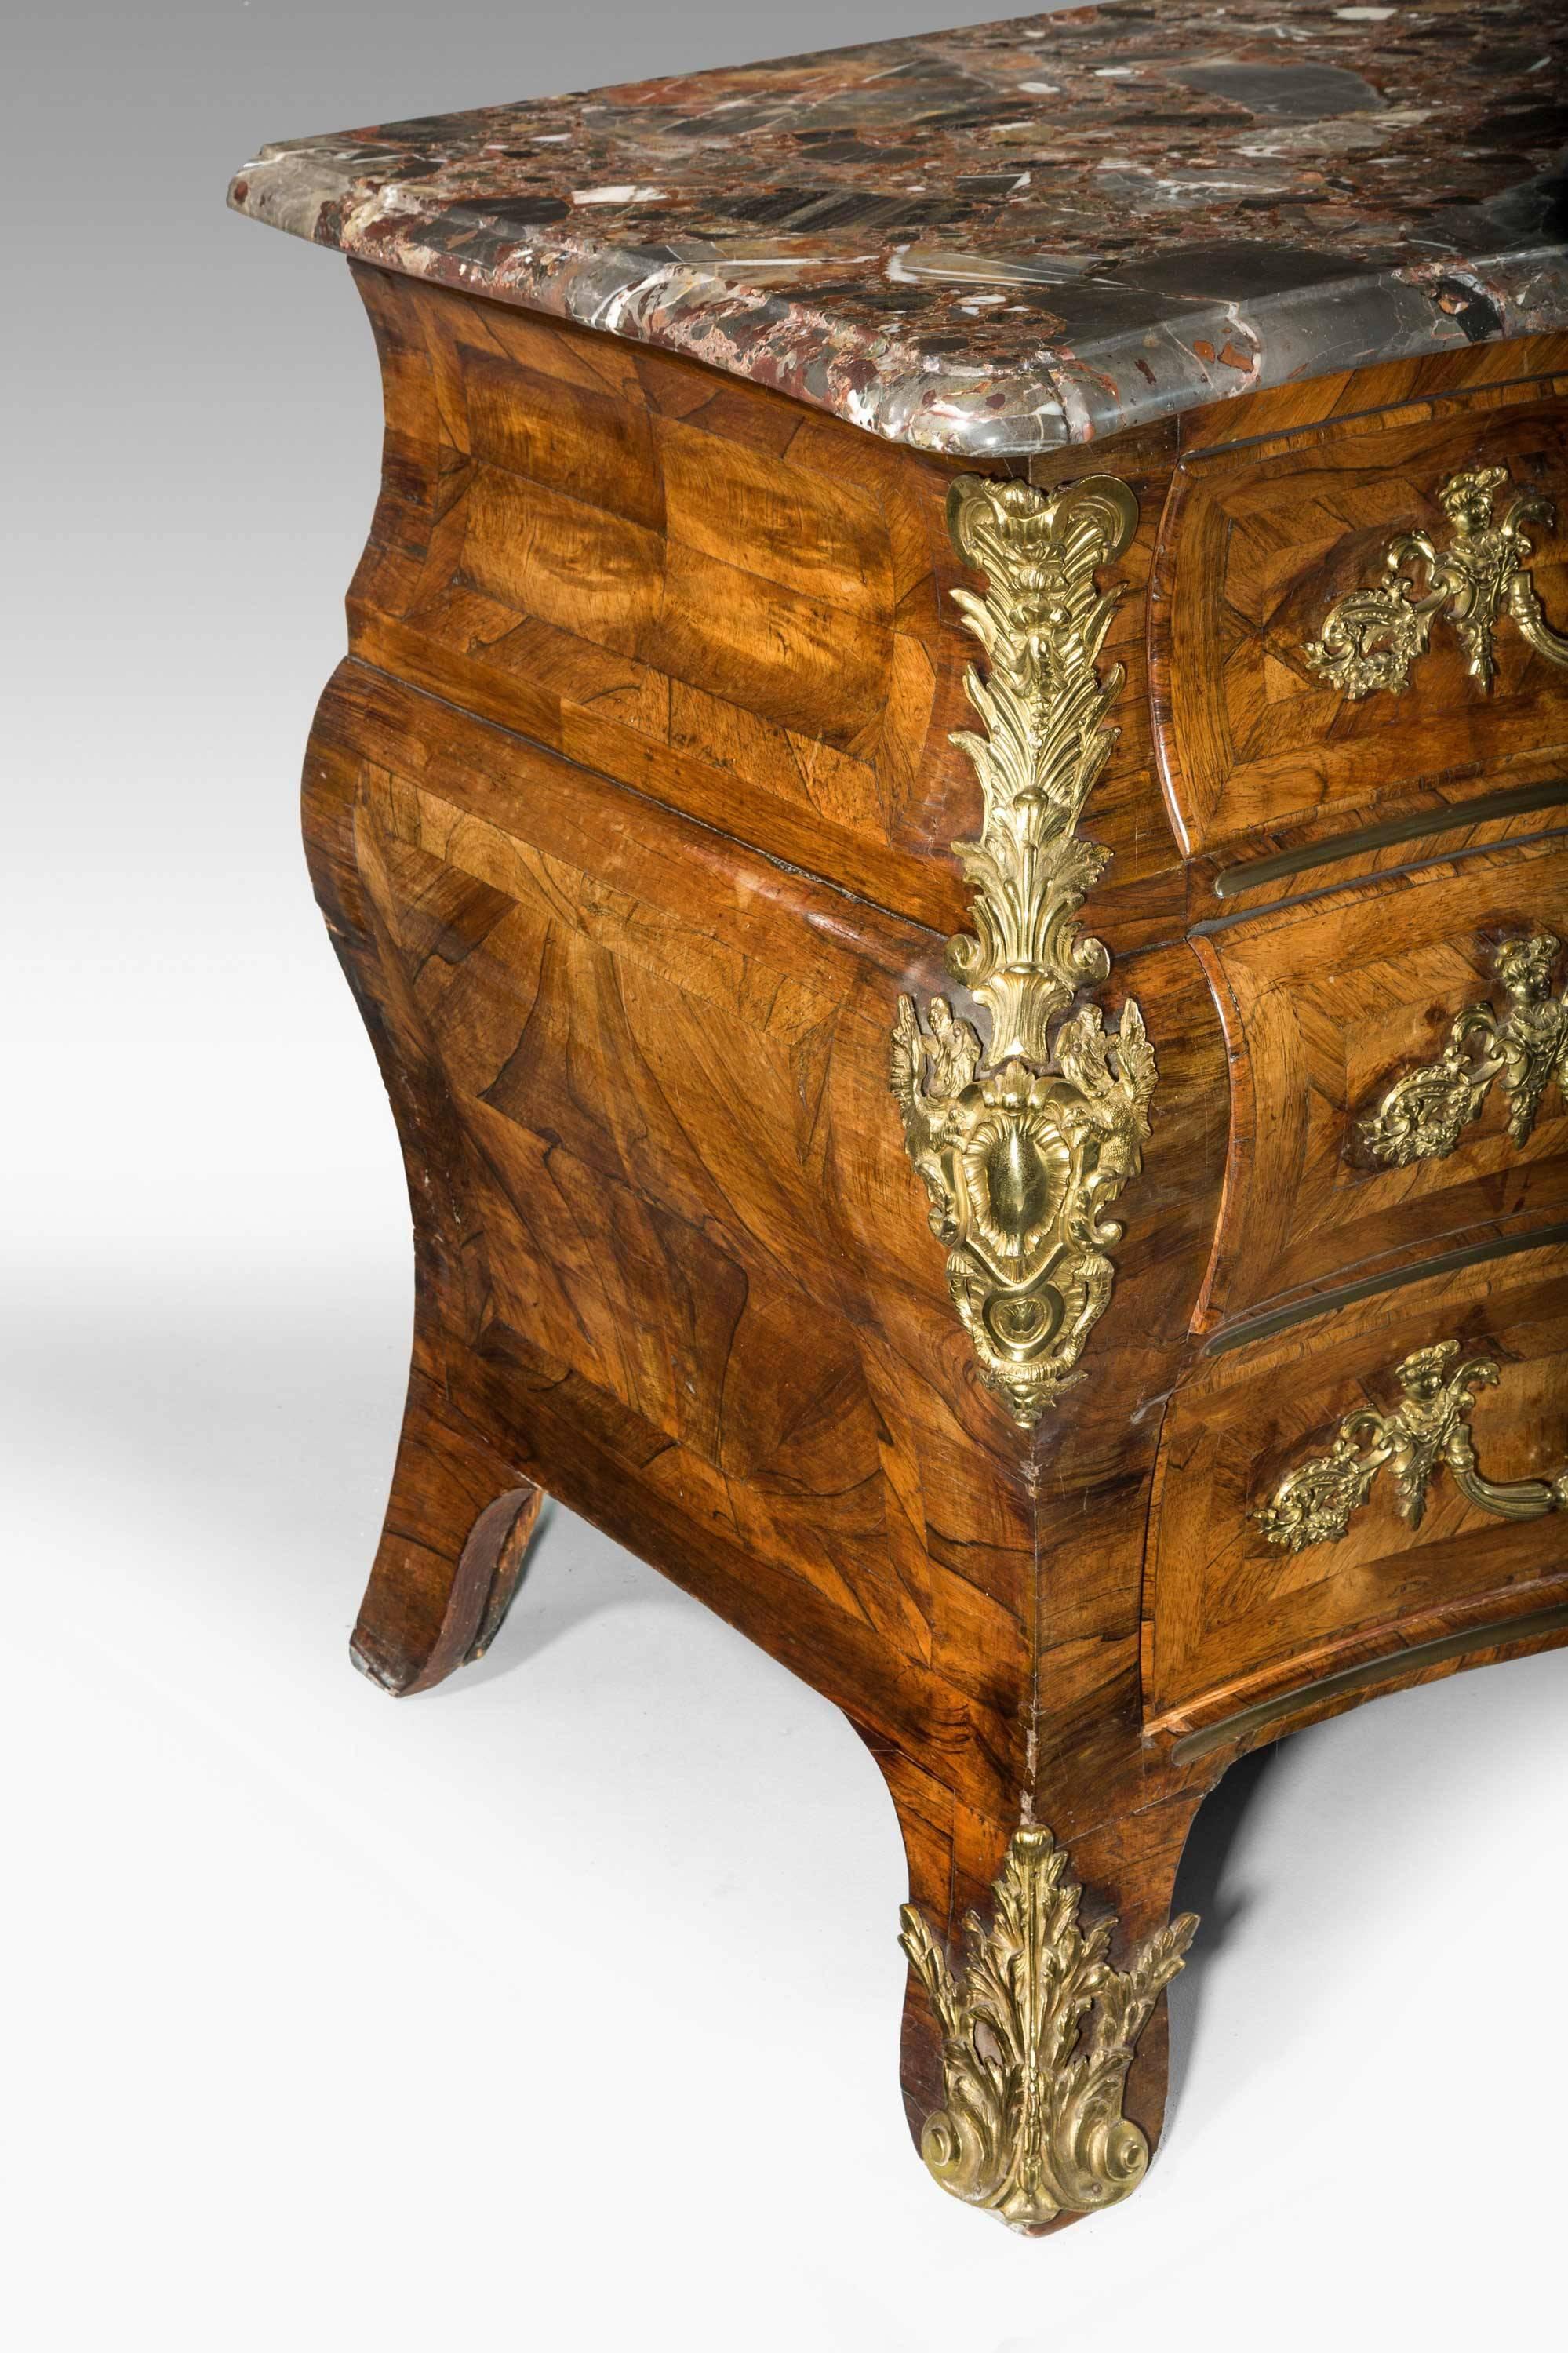 An exceptionally fine Louis XV bombe kingwood commode retaining original period gilt bronze mounts and with a Breche-Violette marble. Formerly in the collection of Dame Barbara Cartland, grandmother of HRH The Princess Diana. Sold in a 1970s estate